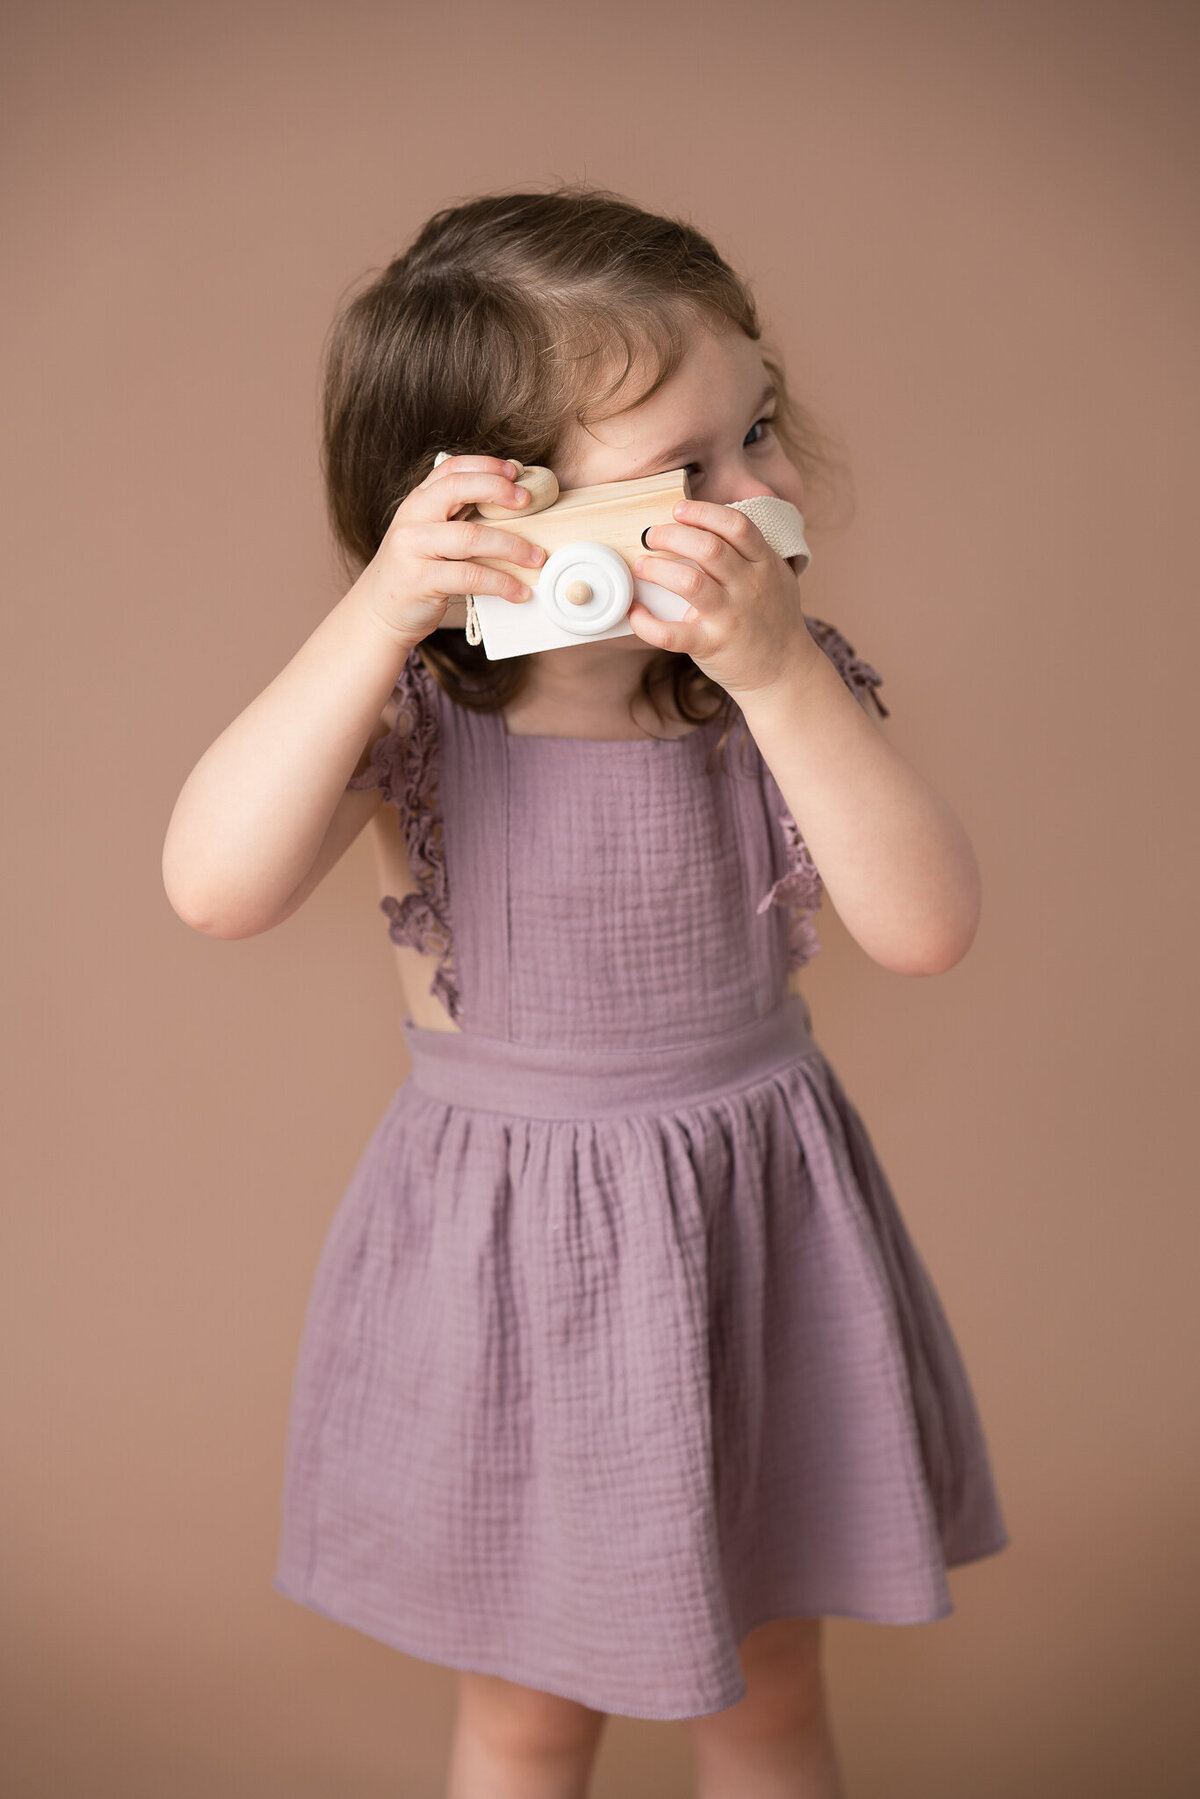 A young girl in a purple dress is holding a toy wooden camera.